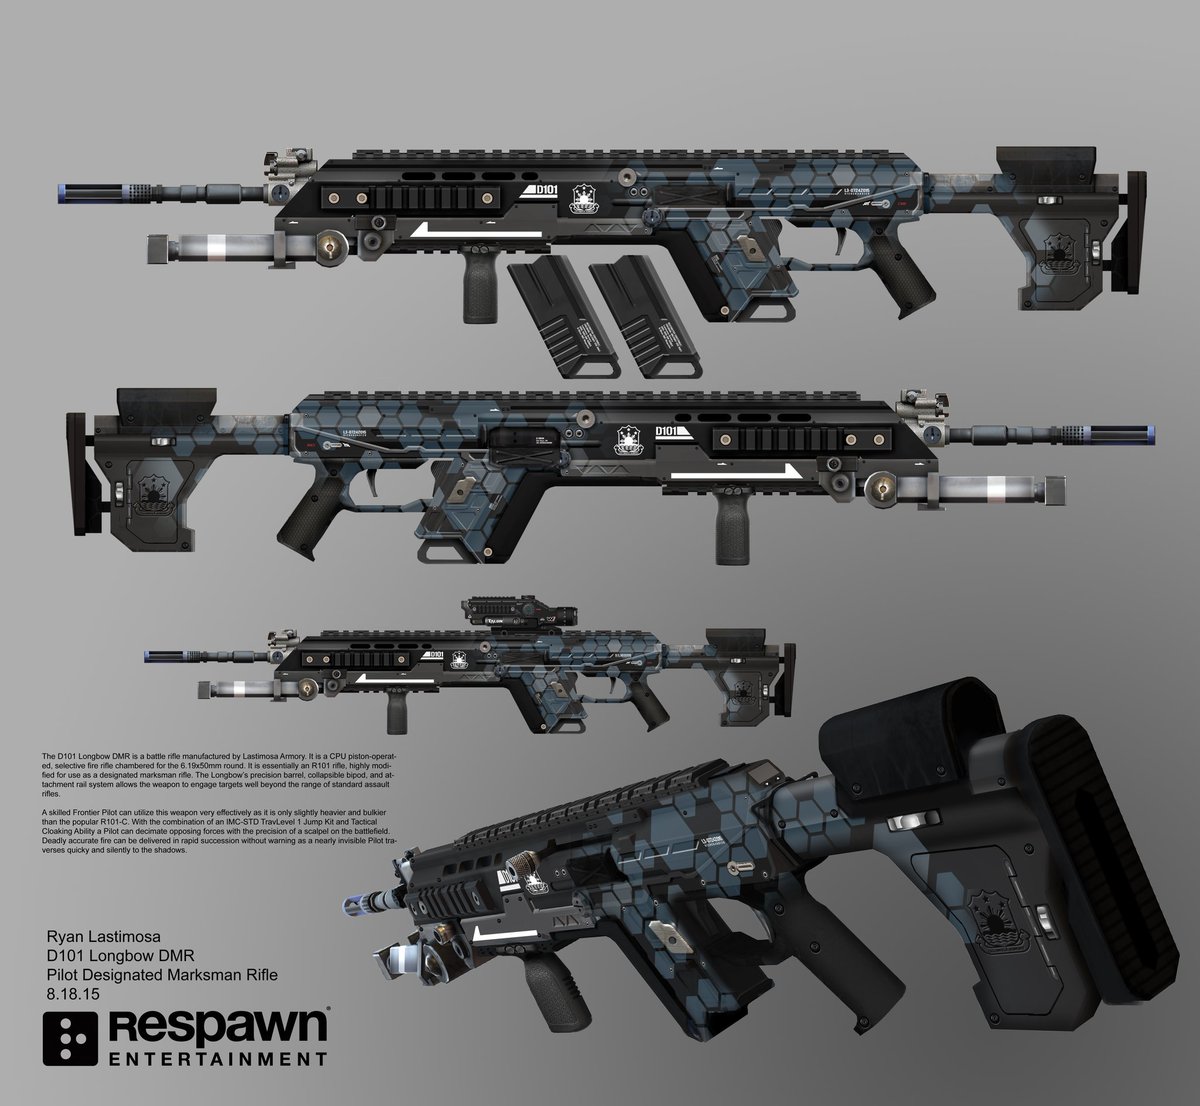 Ryan Lastimosa Here S A Series Of Concepts Of The R101 R1 R301 Rifles And The Dmr From Titanfall And Apex Legends This Weapon Has Evolved A Great Deal From 10